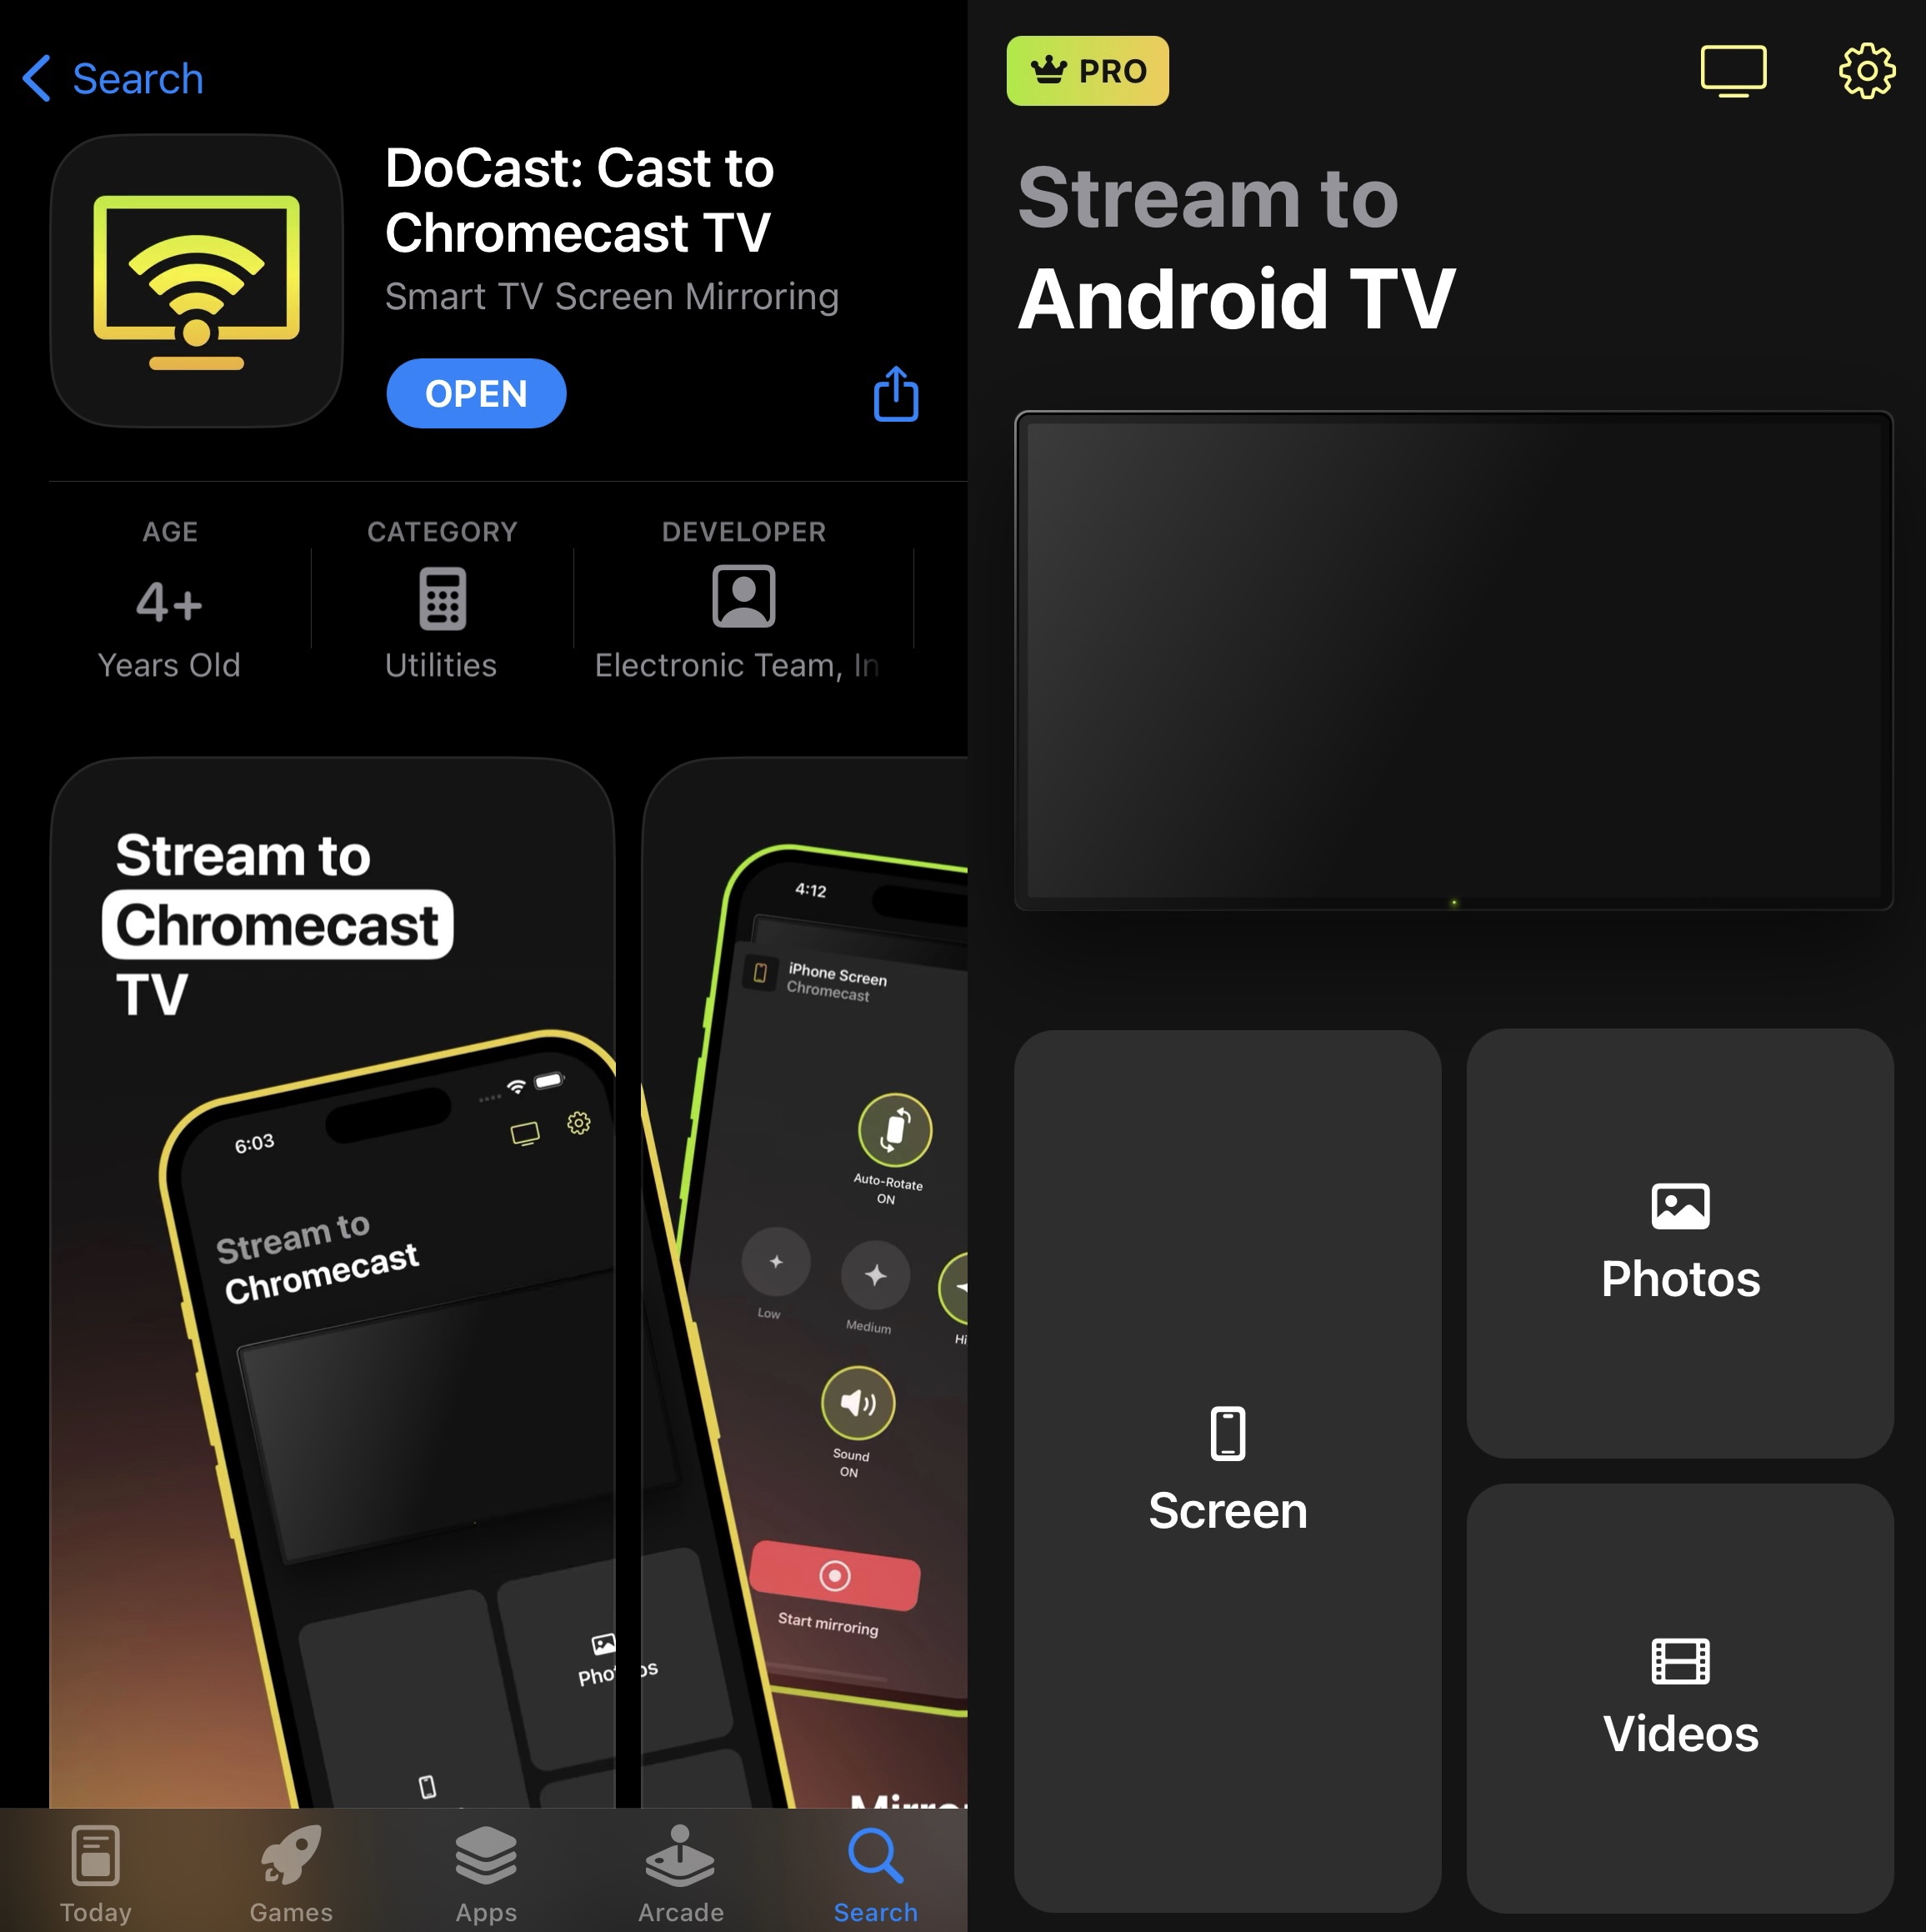 DoCast live video streaming app for iPhone